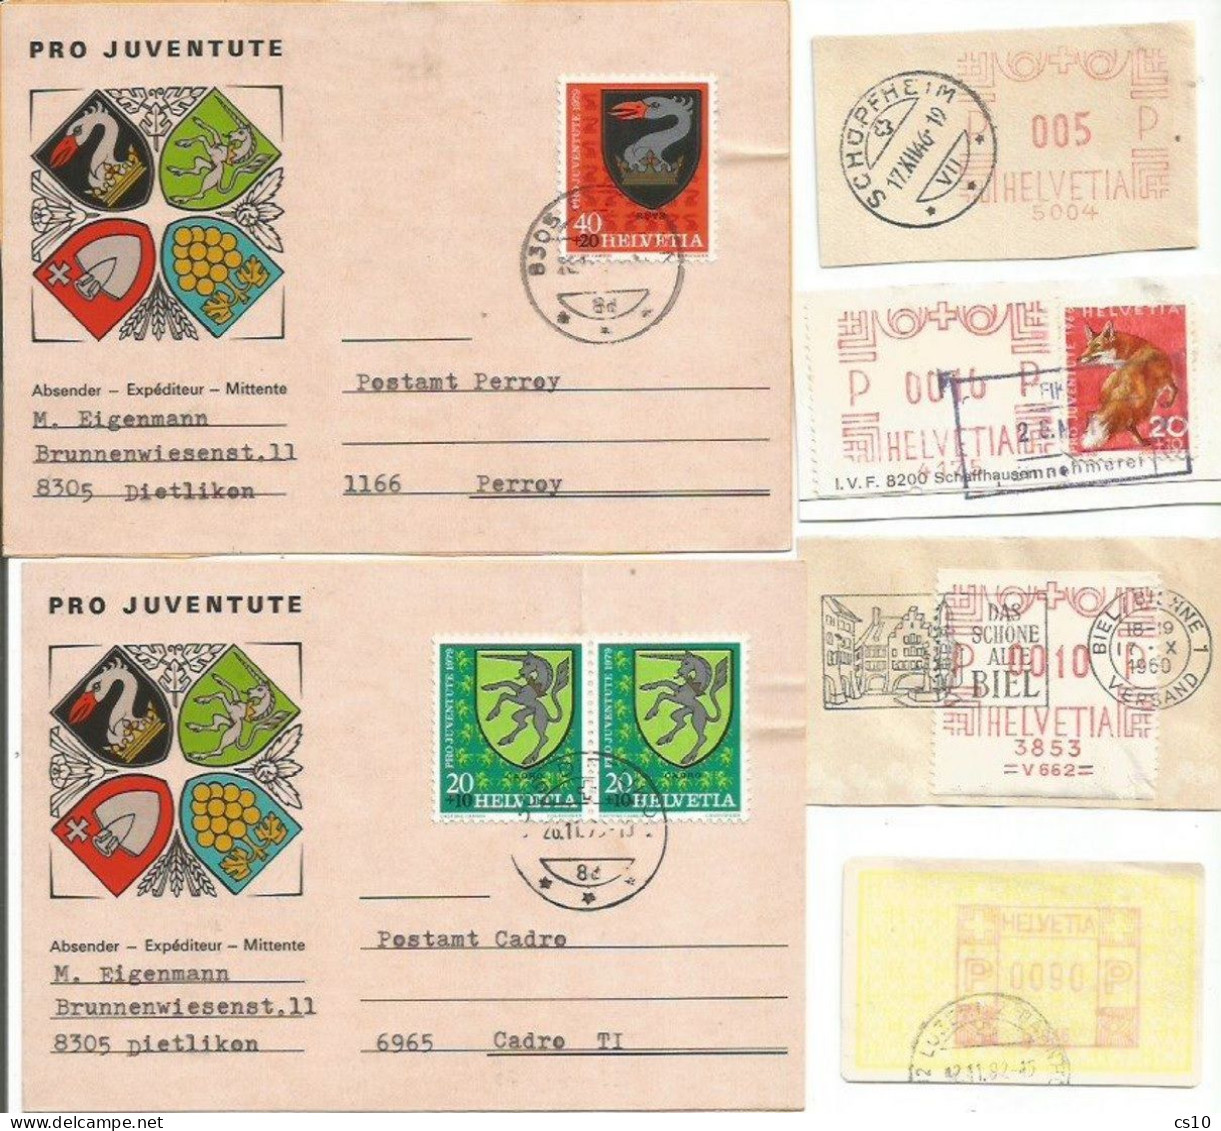 SUISSE scarce 12 scans lot with NON Issued SION 2006 Winter Olympics + Frama Atm Stamps Labels Tete-Beche P.Due Variety